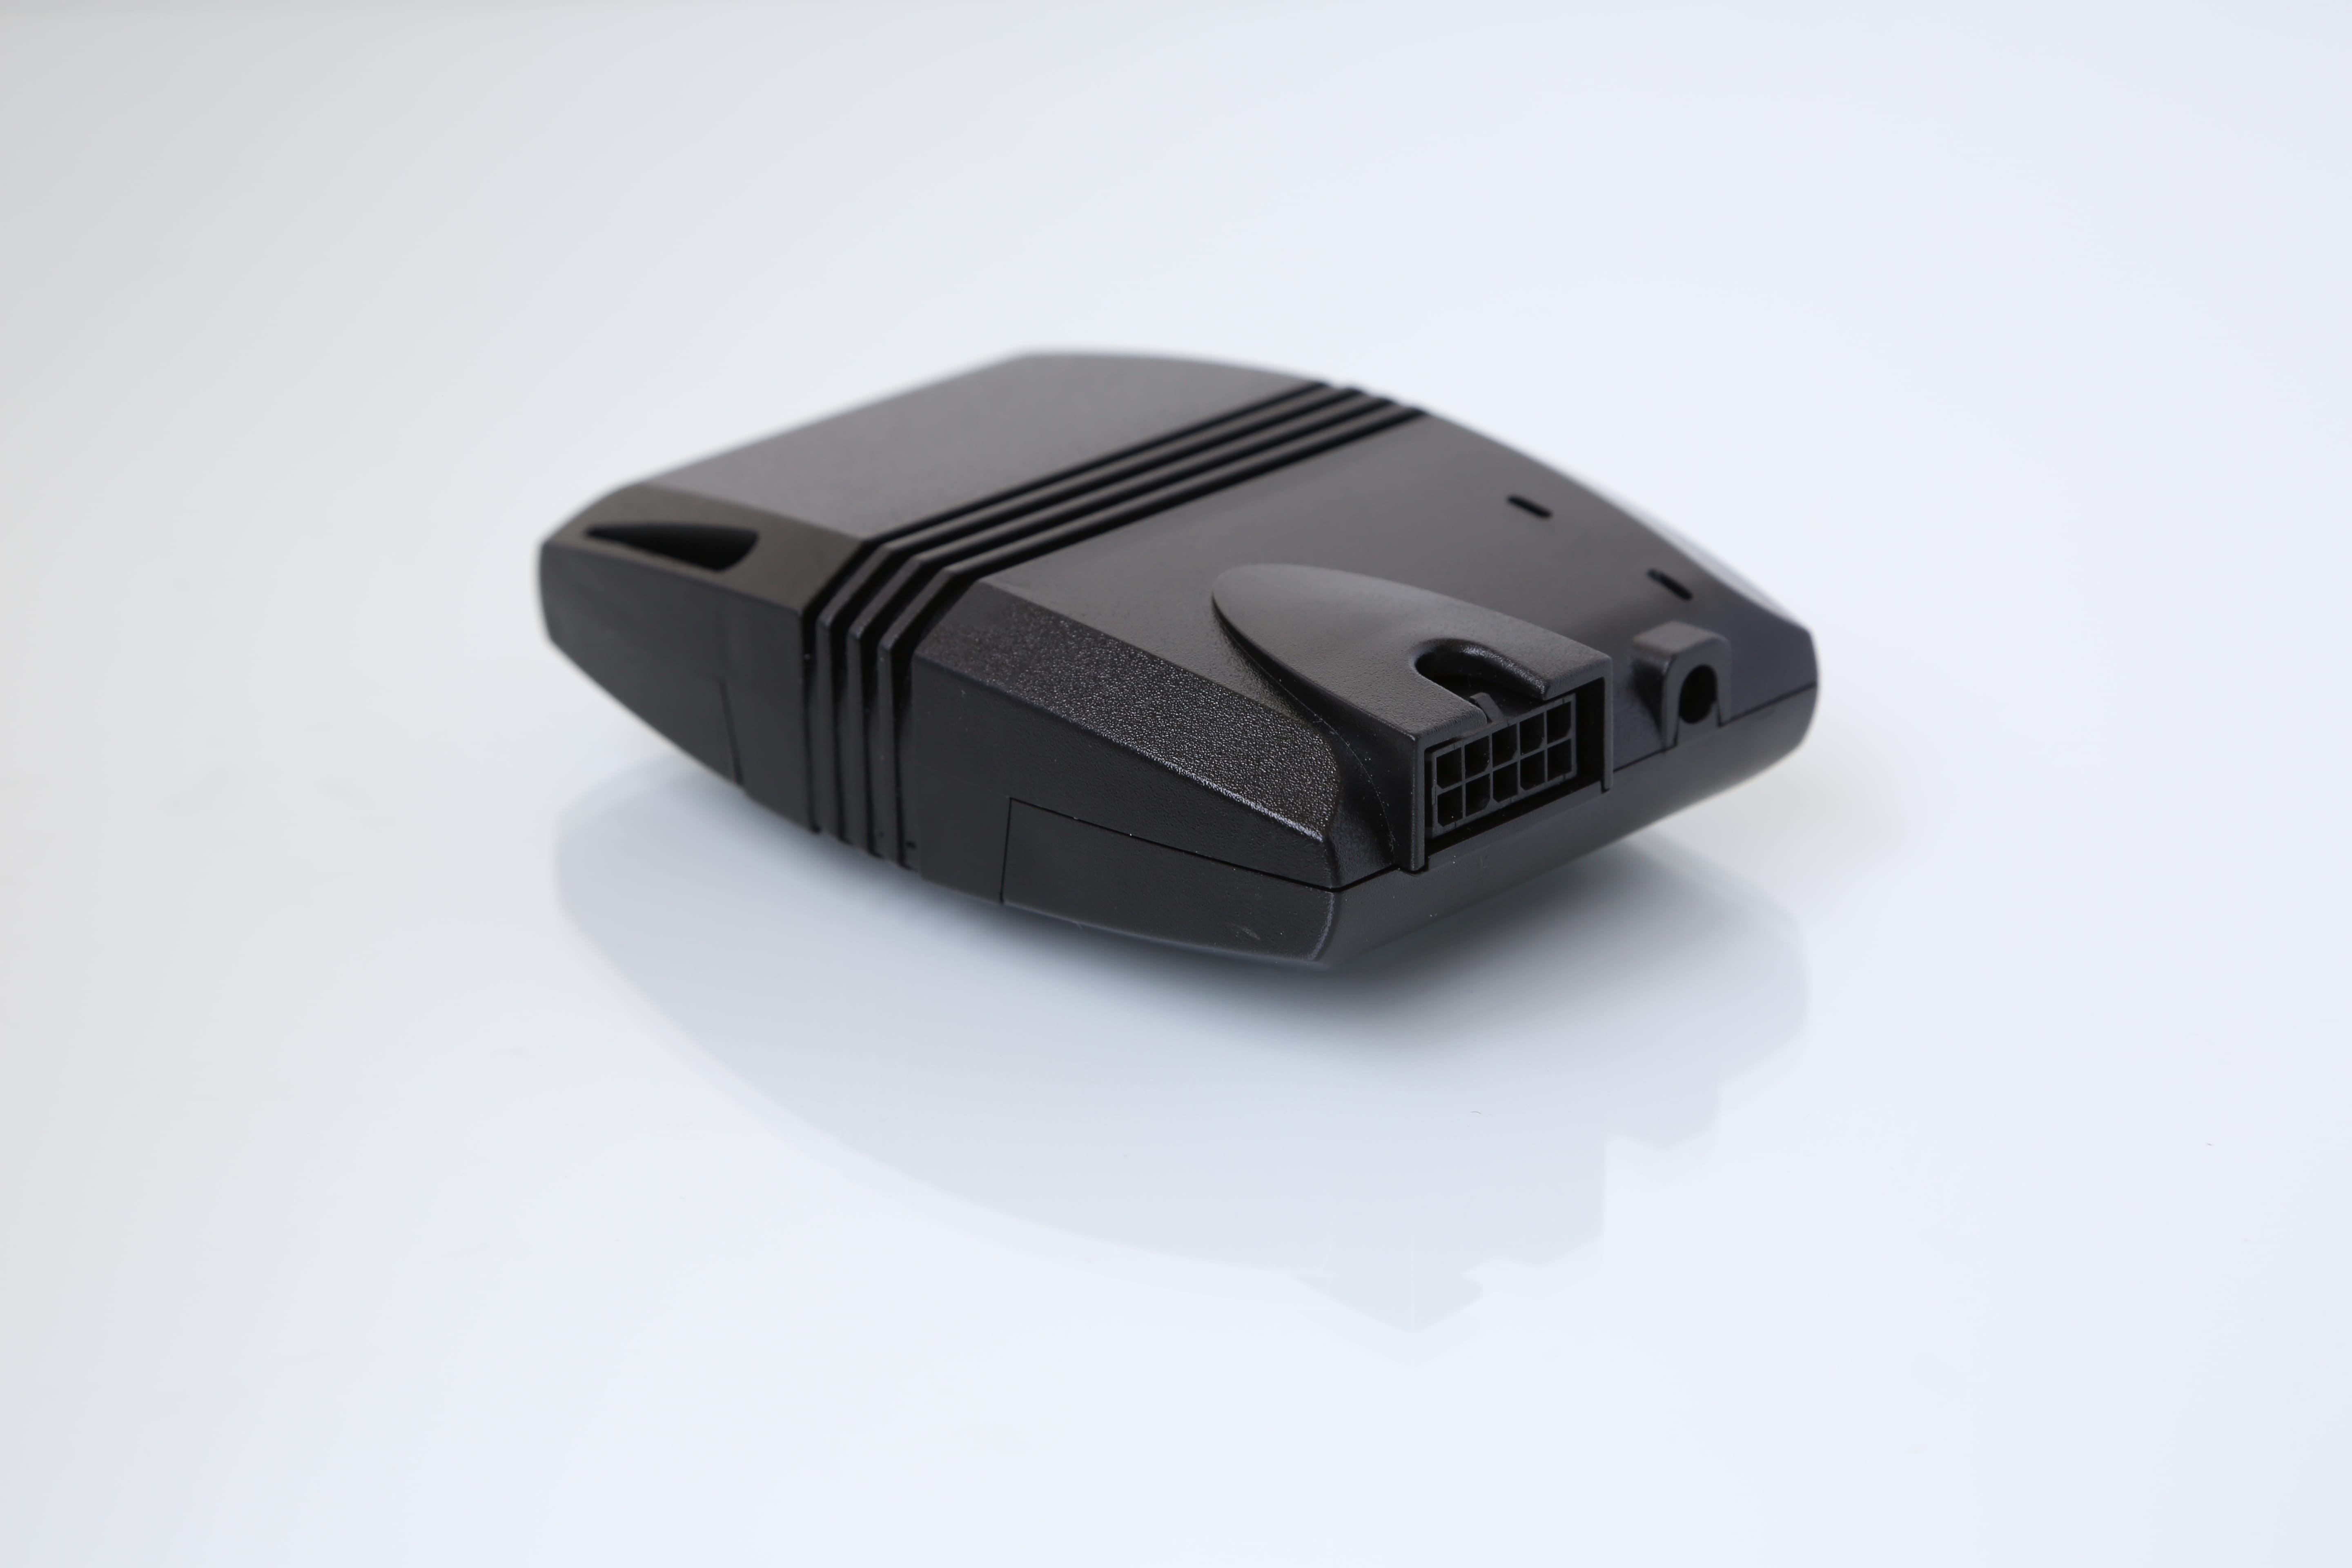 u-blox Collaborates with ERM on Vehicle Tracking Device with Built-in Wi Fi Hotspot